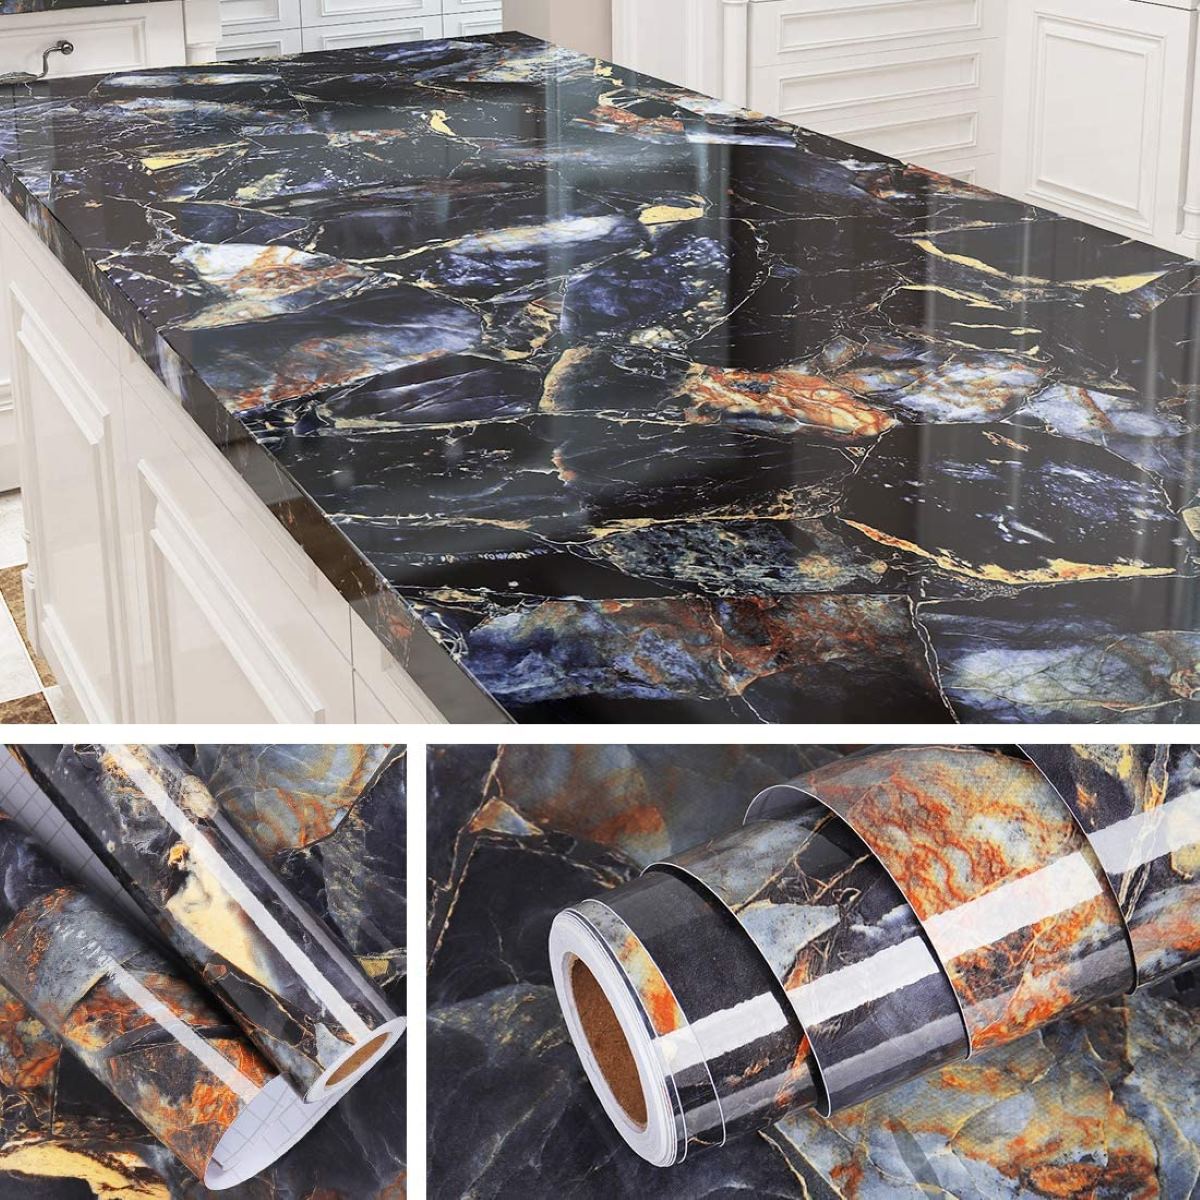 What Can You Cover Countertops With